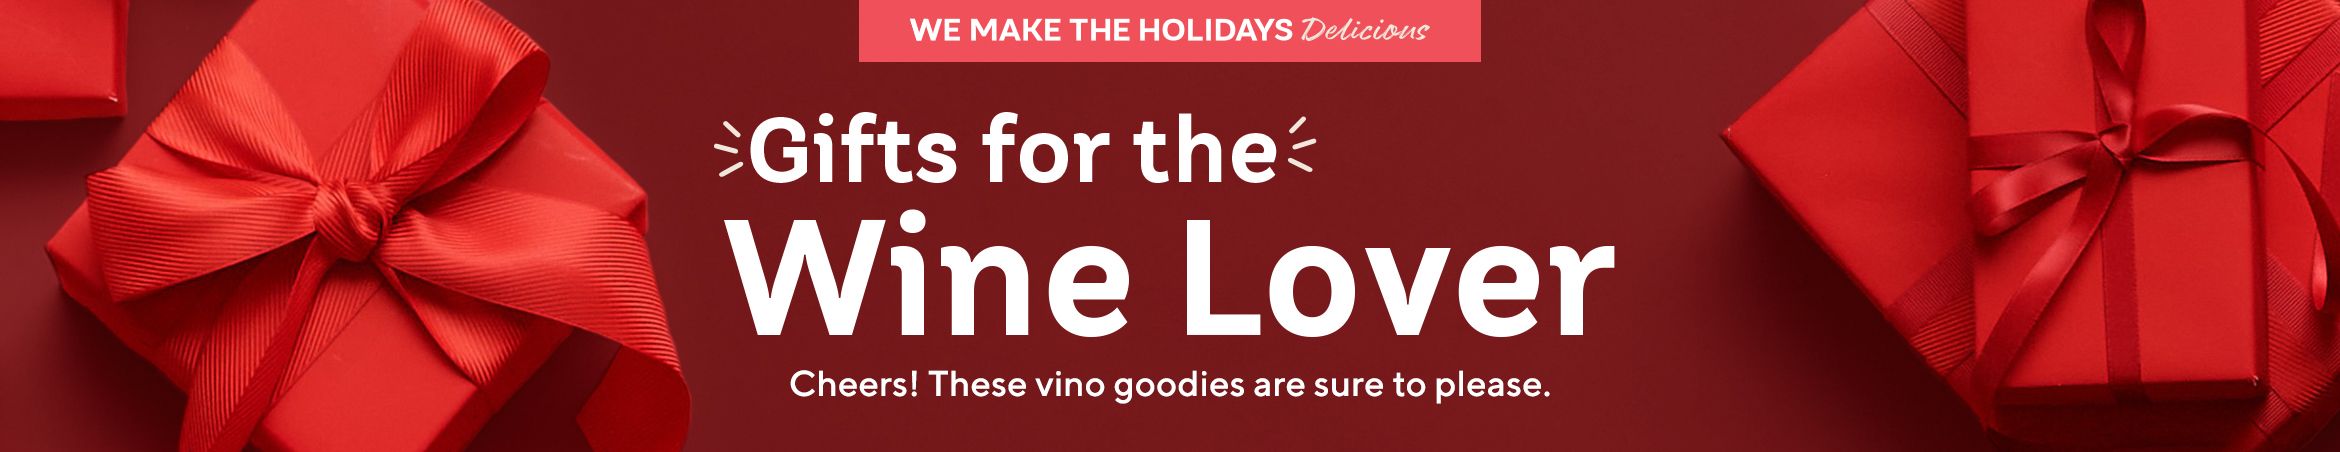 Gifts for the Wine Lover  Cheers! These vino goodies are sure to please. 